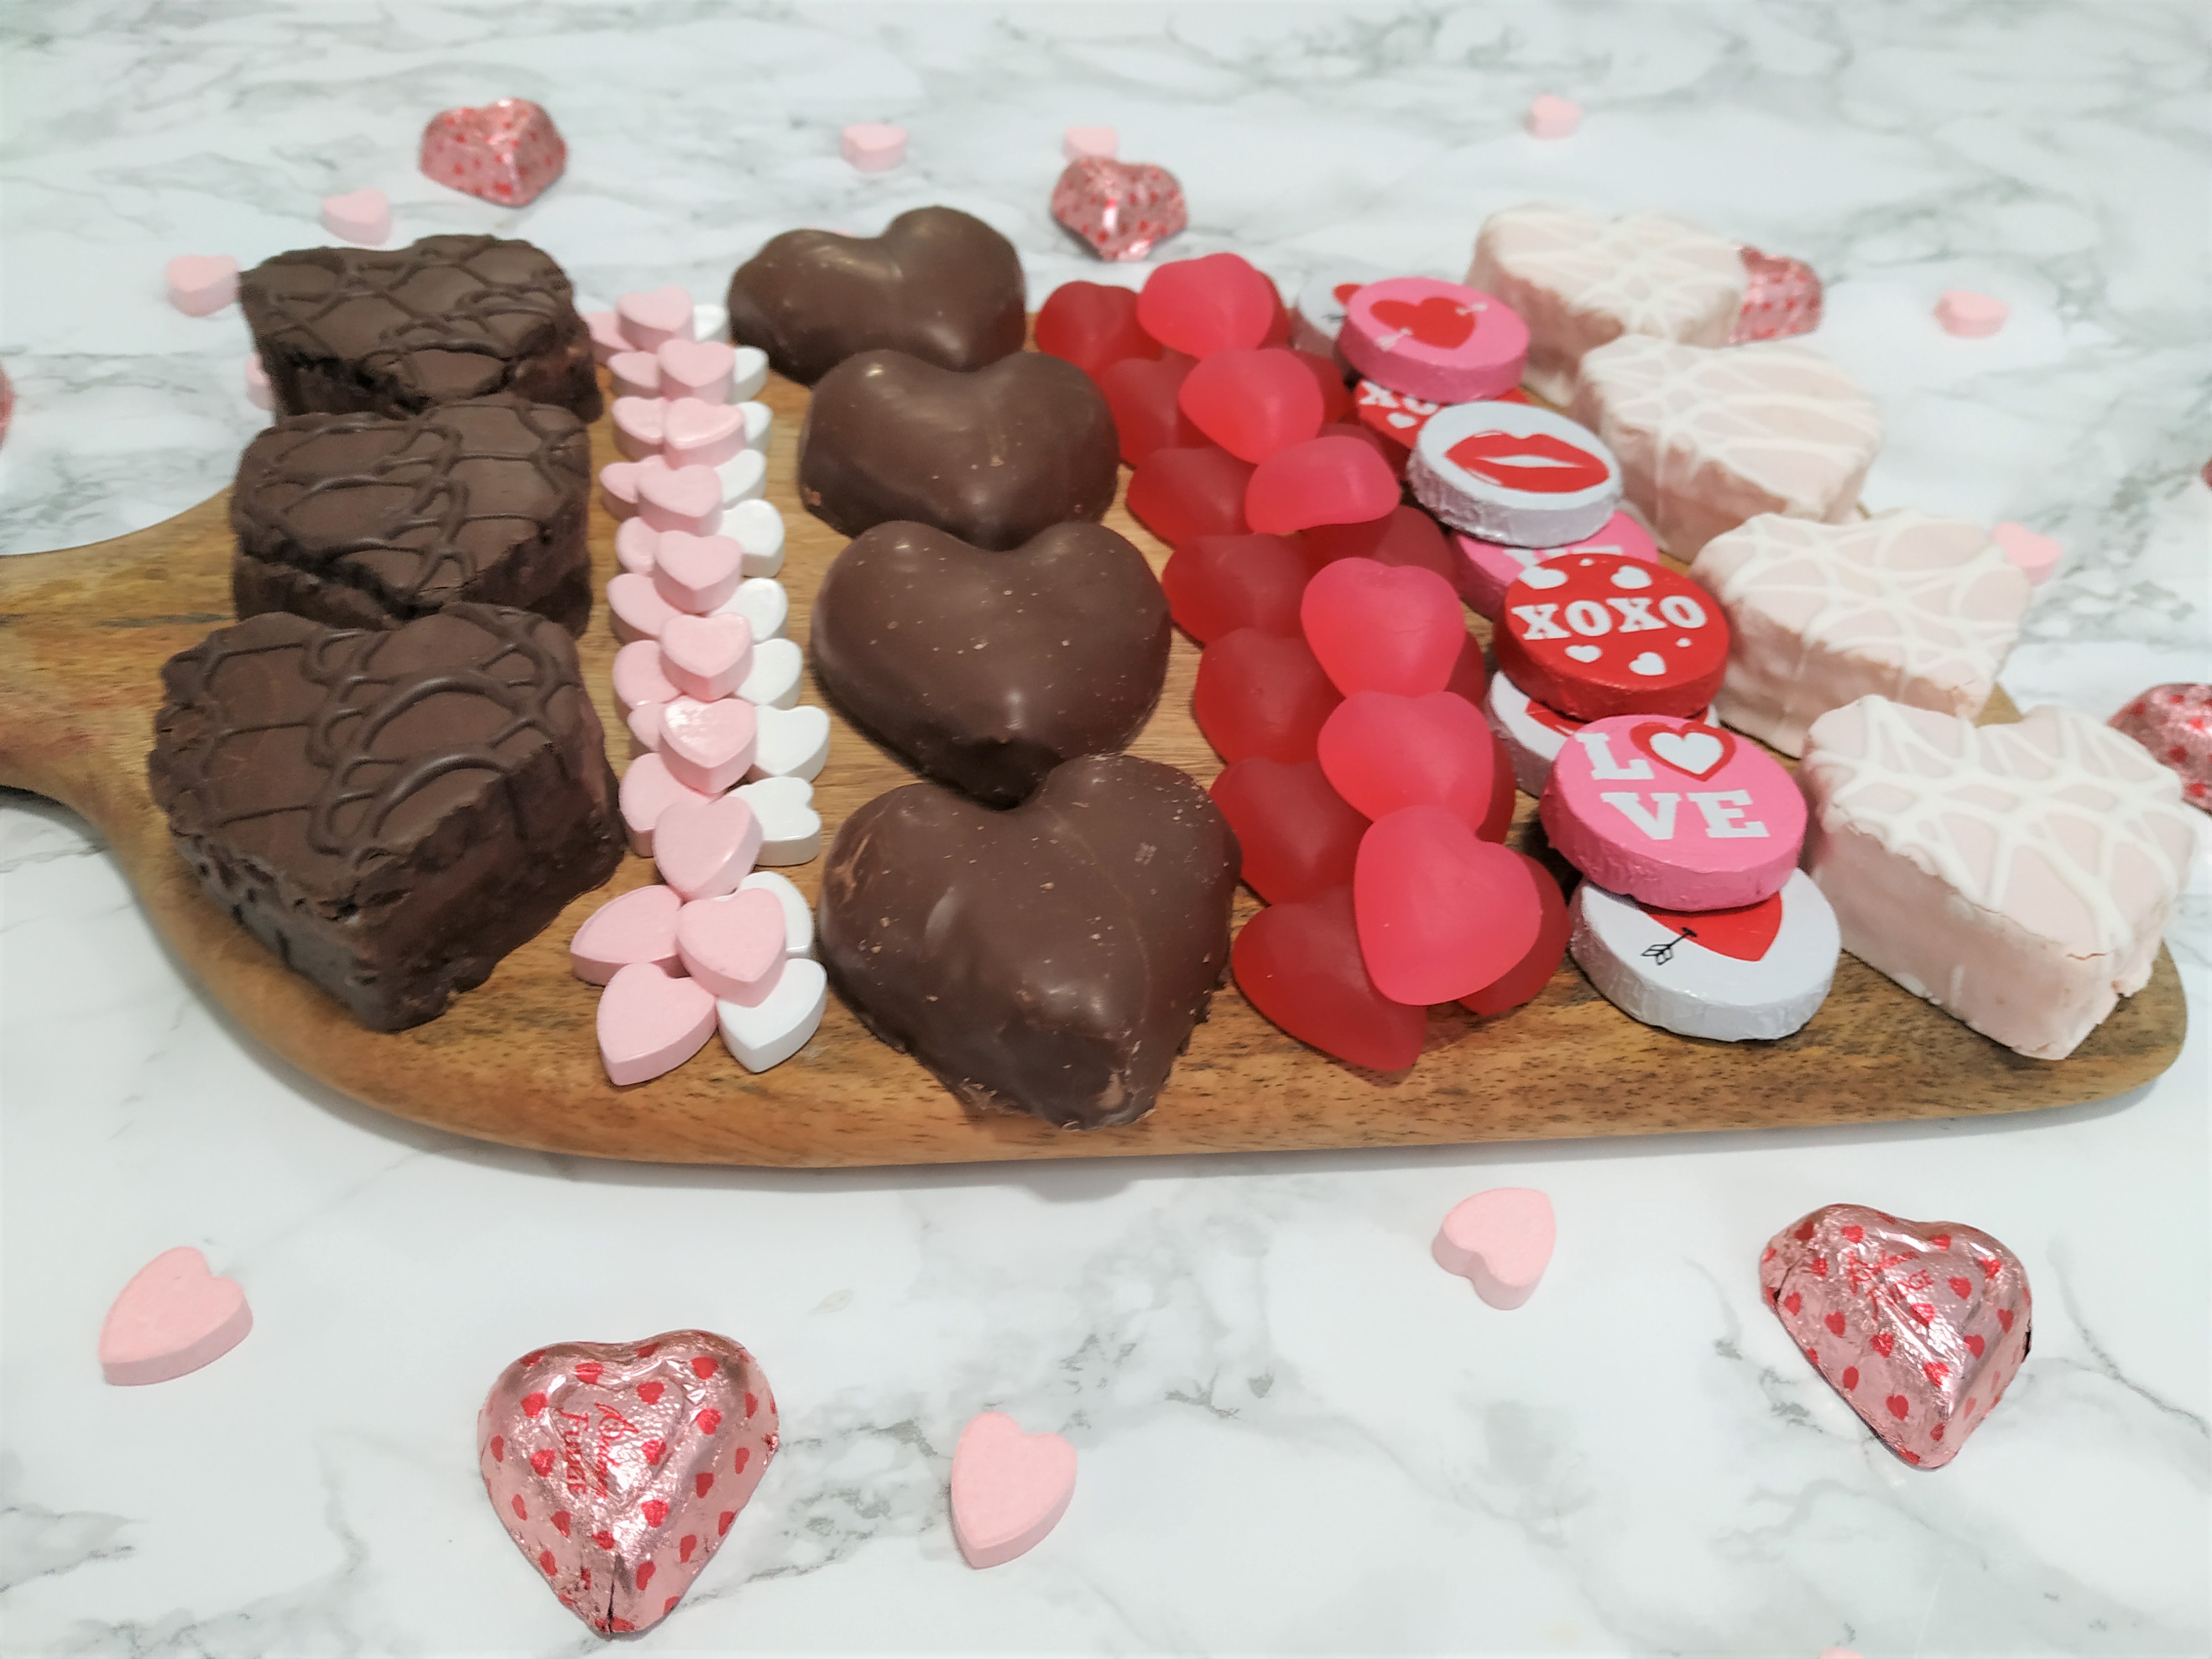 Candy, chocolates and cakes put on a charcuterie board with candy hearts sprinkled around.